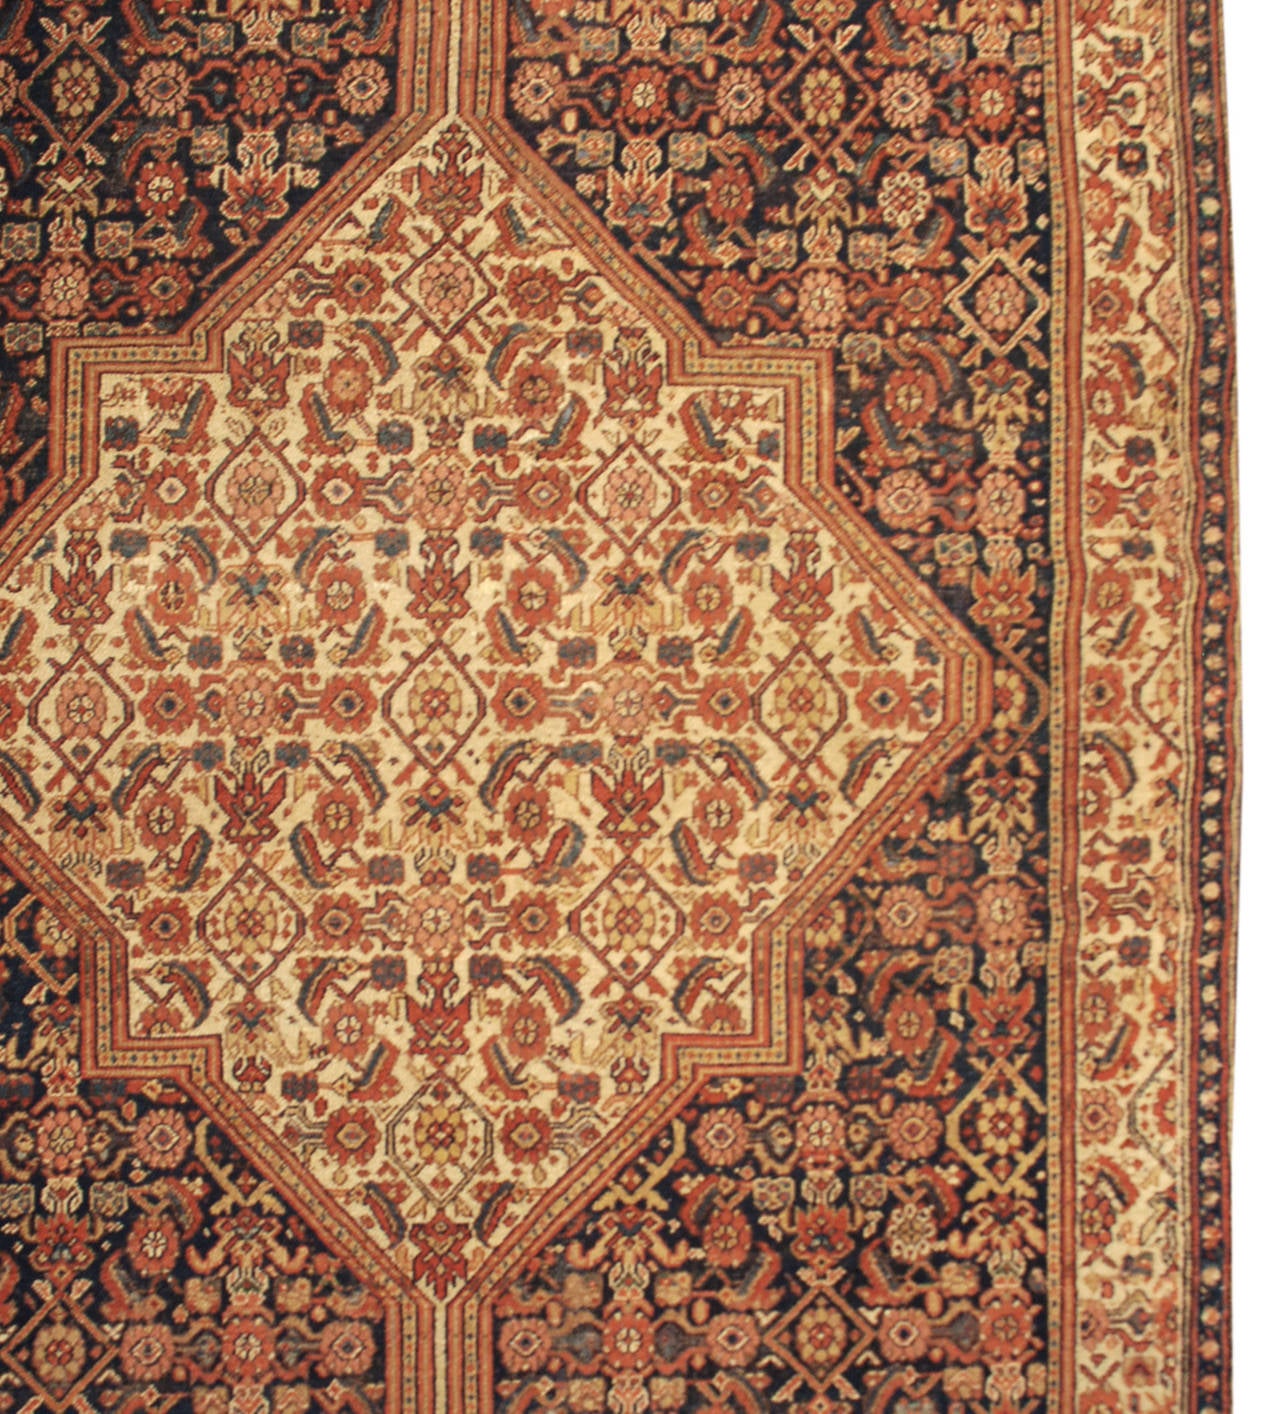 An elaborately woven 19th century Persian Bibikabad runner with large central diamond medallion with a floral lattice pattern on a similar but contrasting floral lattice background surrounded by multiple complementary floral borders.